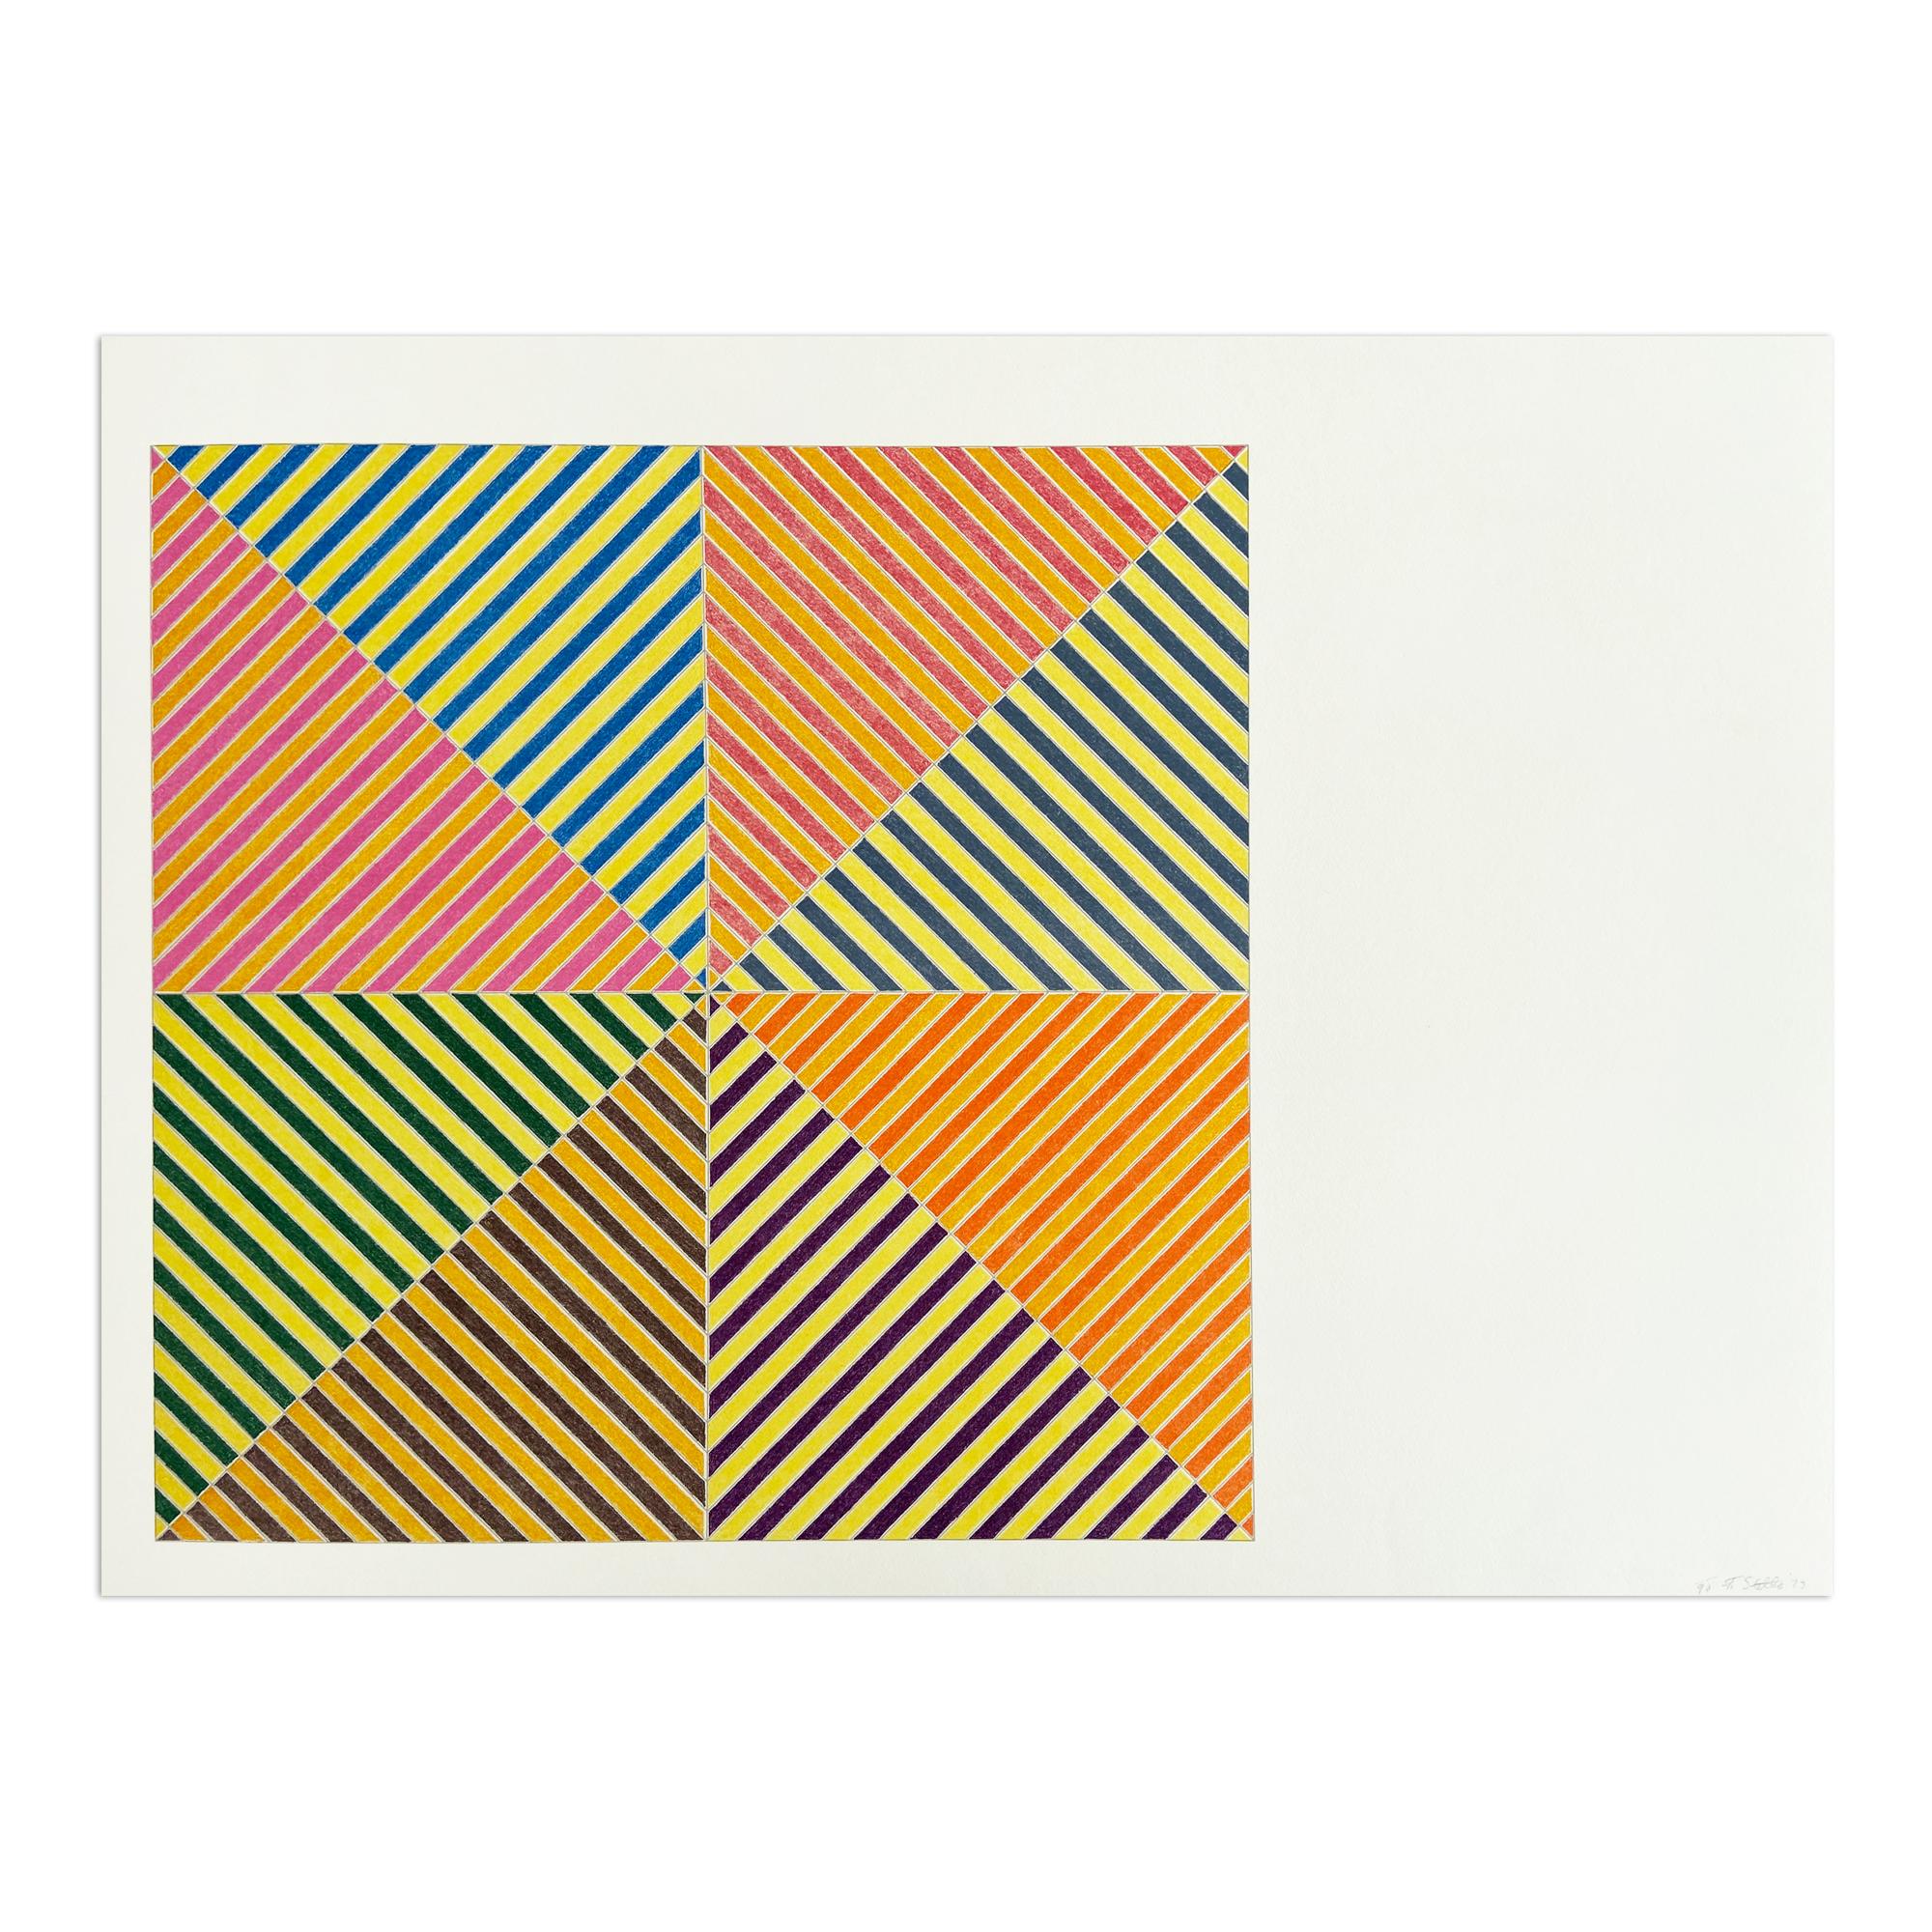 Frank Stella (American, b. 1936)
Sidi Ifni (from Hommage à Picasso), 1973
Medium: Lithograph in colors, on wove paper
Dimensions: 22 × 30 in (55.8 × 76.2 cm)
Edition of 90 + XXX + 15 AP: Hand signed and numbered in pencil
Publisher: